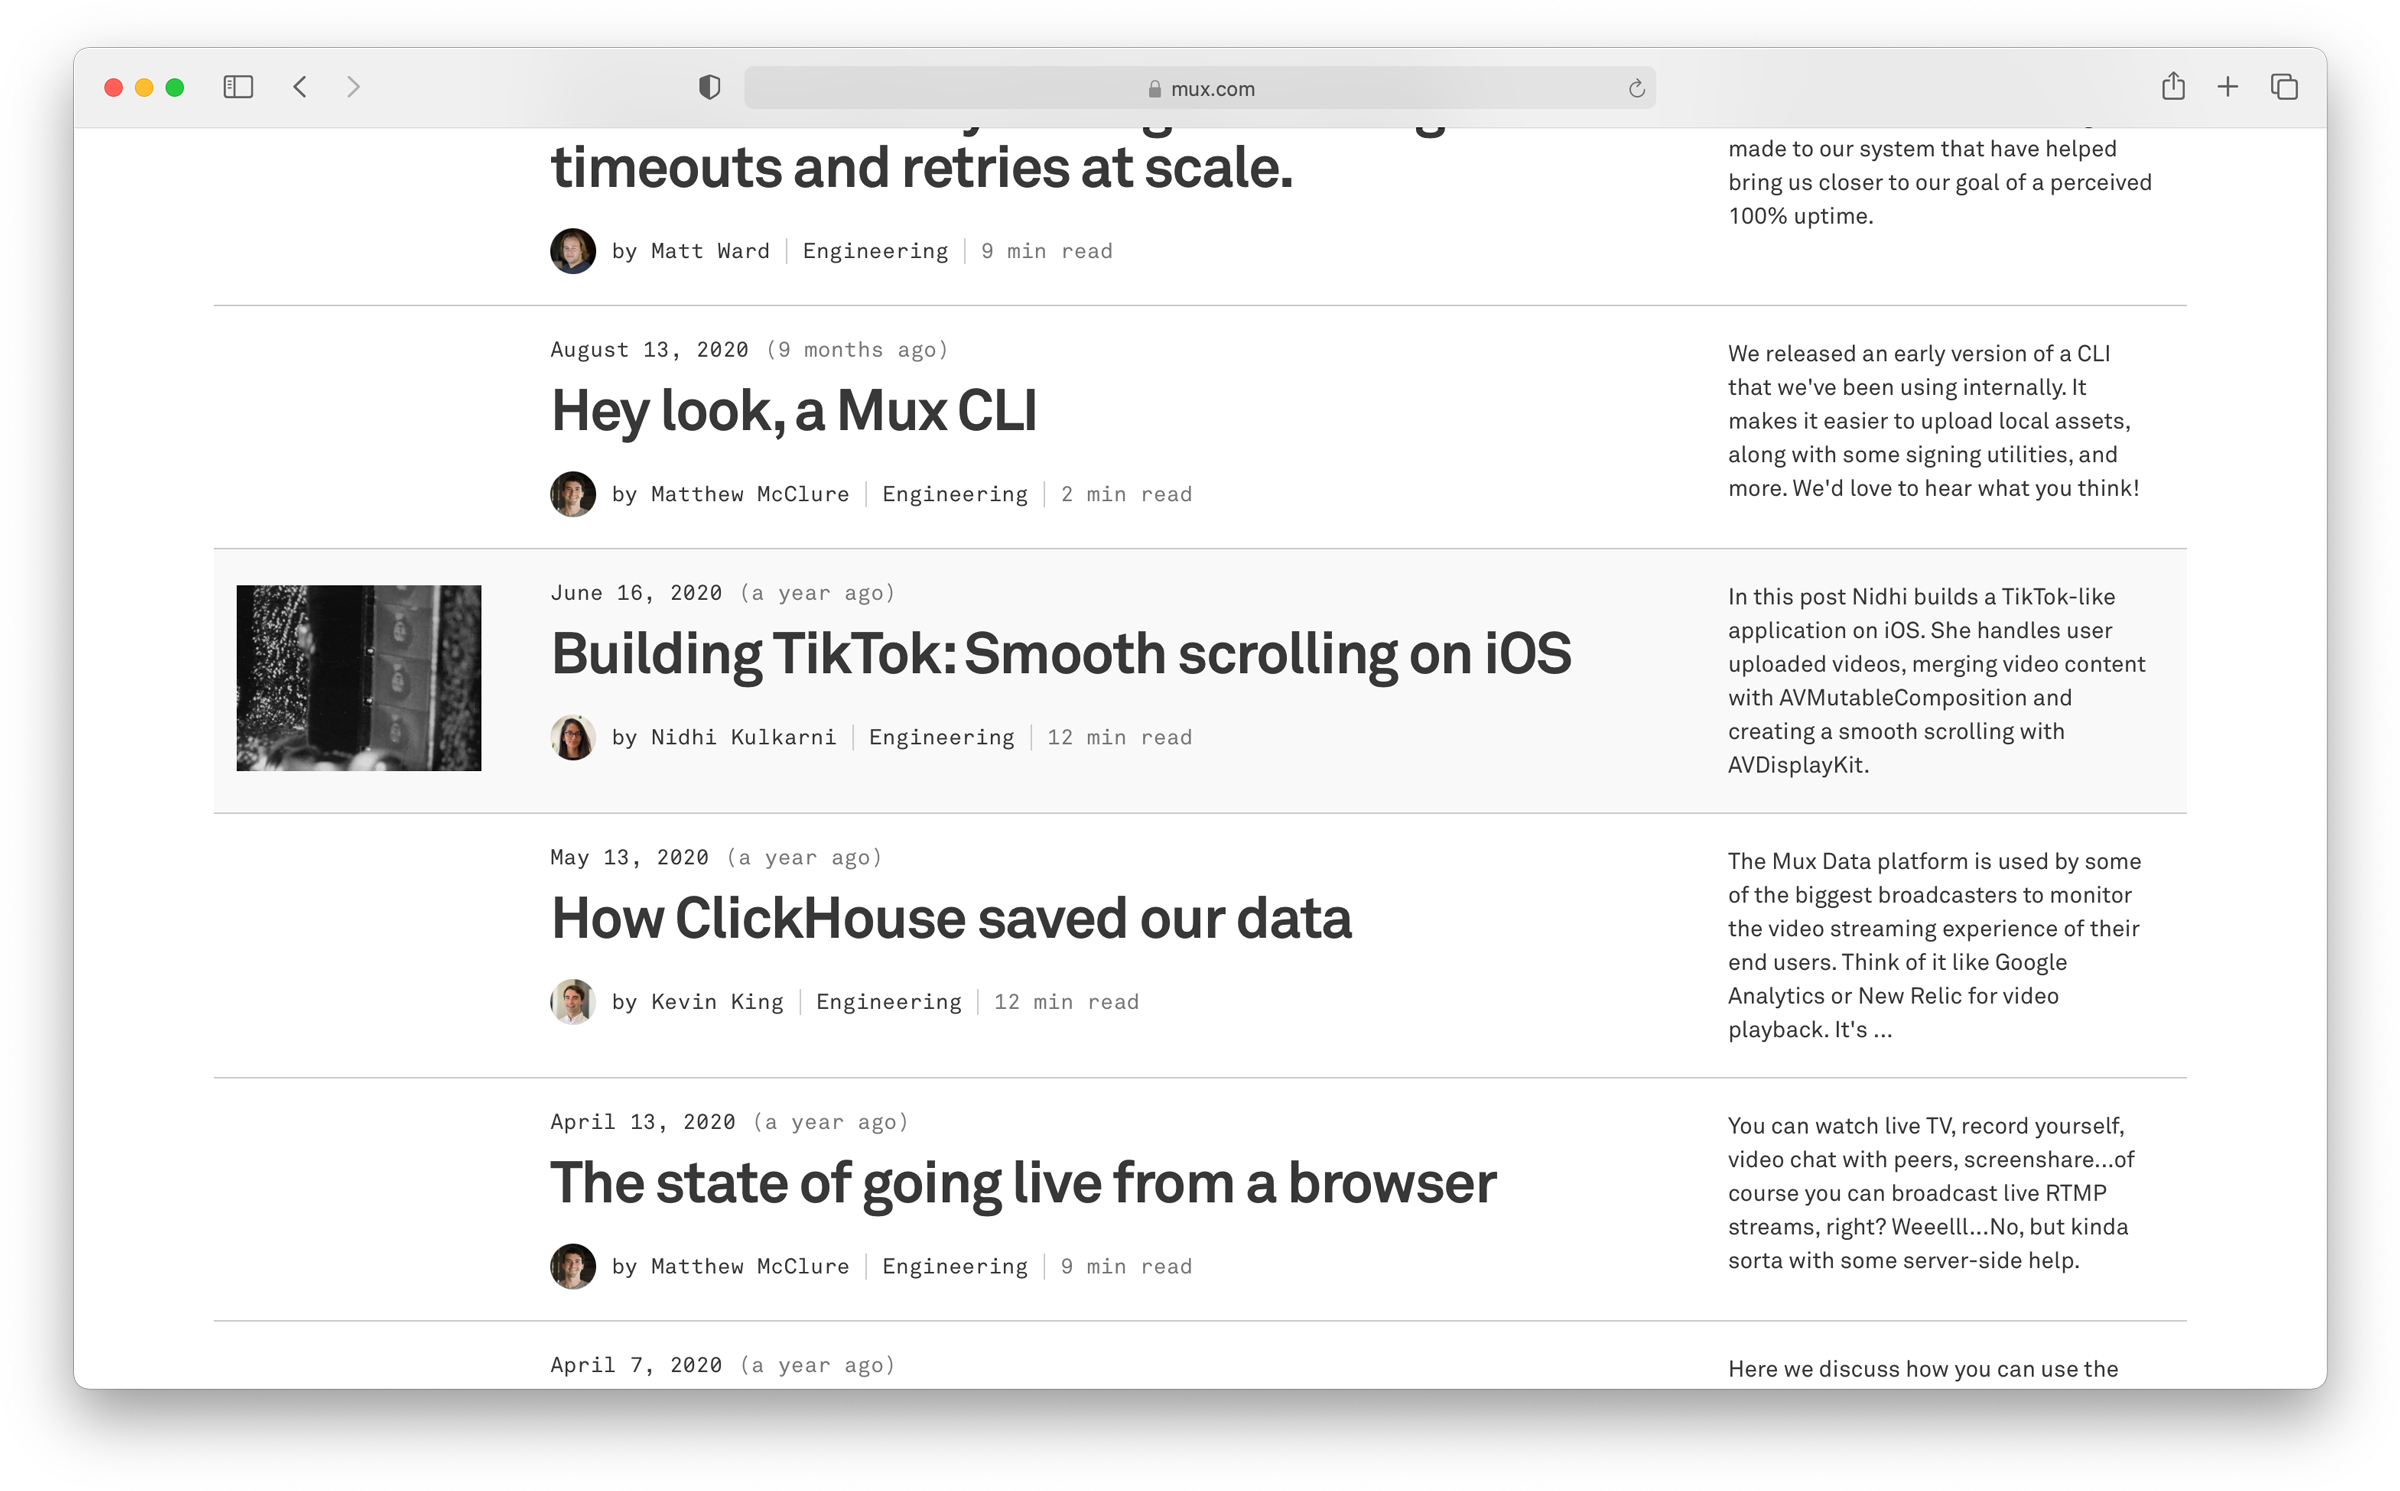 A list view of blog articles